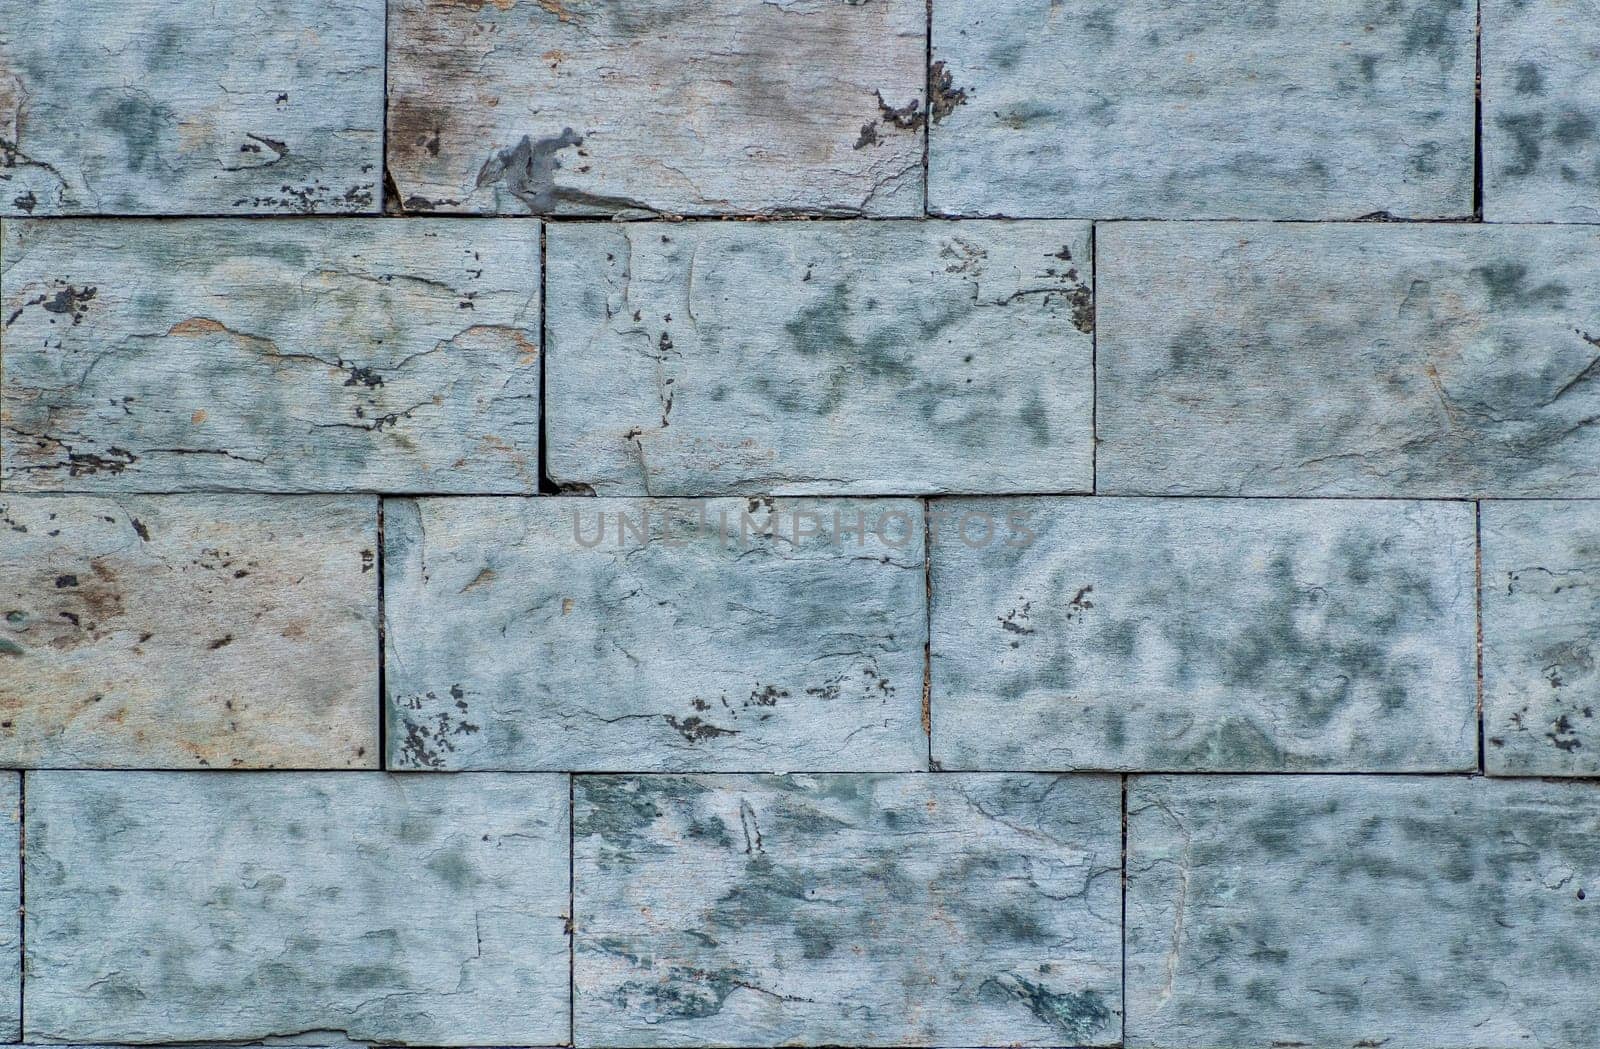 Area of ceramic tiles in the style of stone, as a texture or background for further graphic work